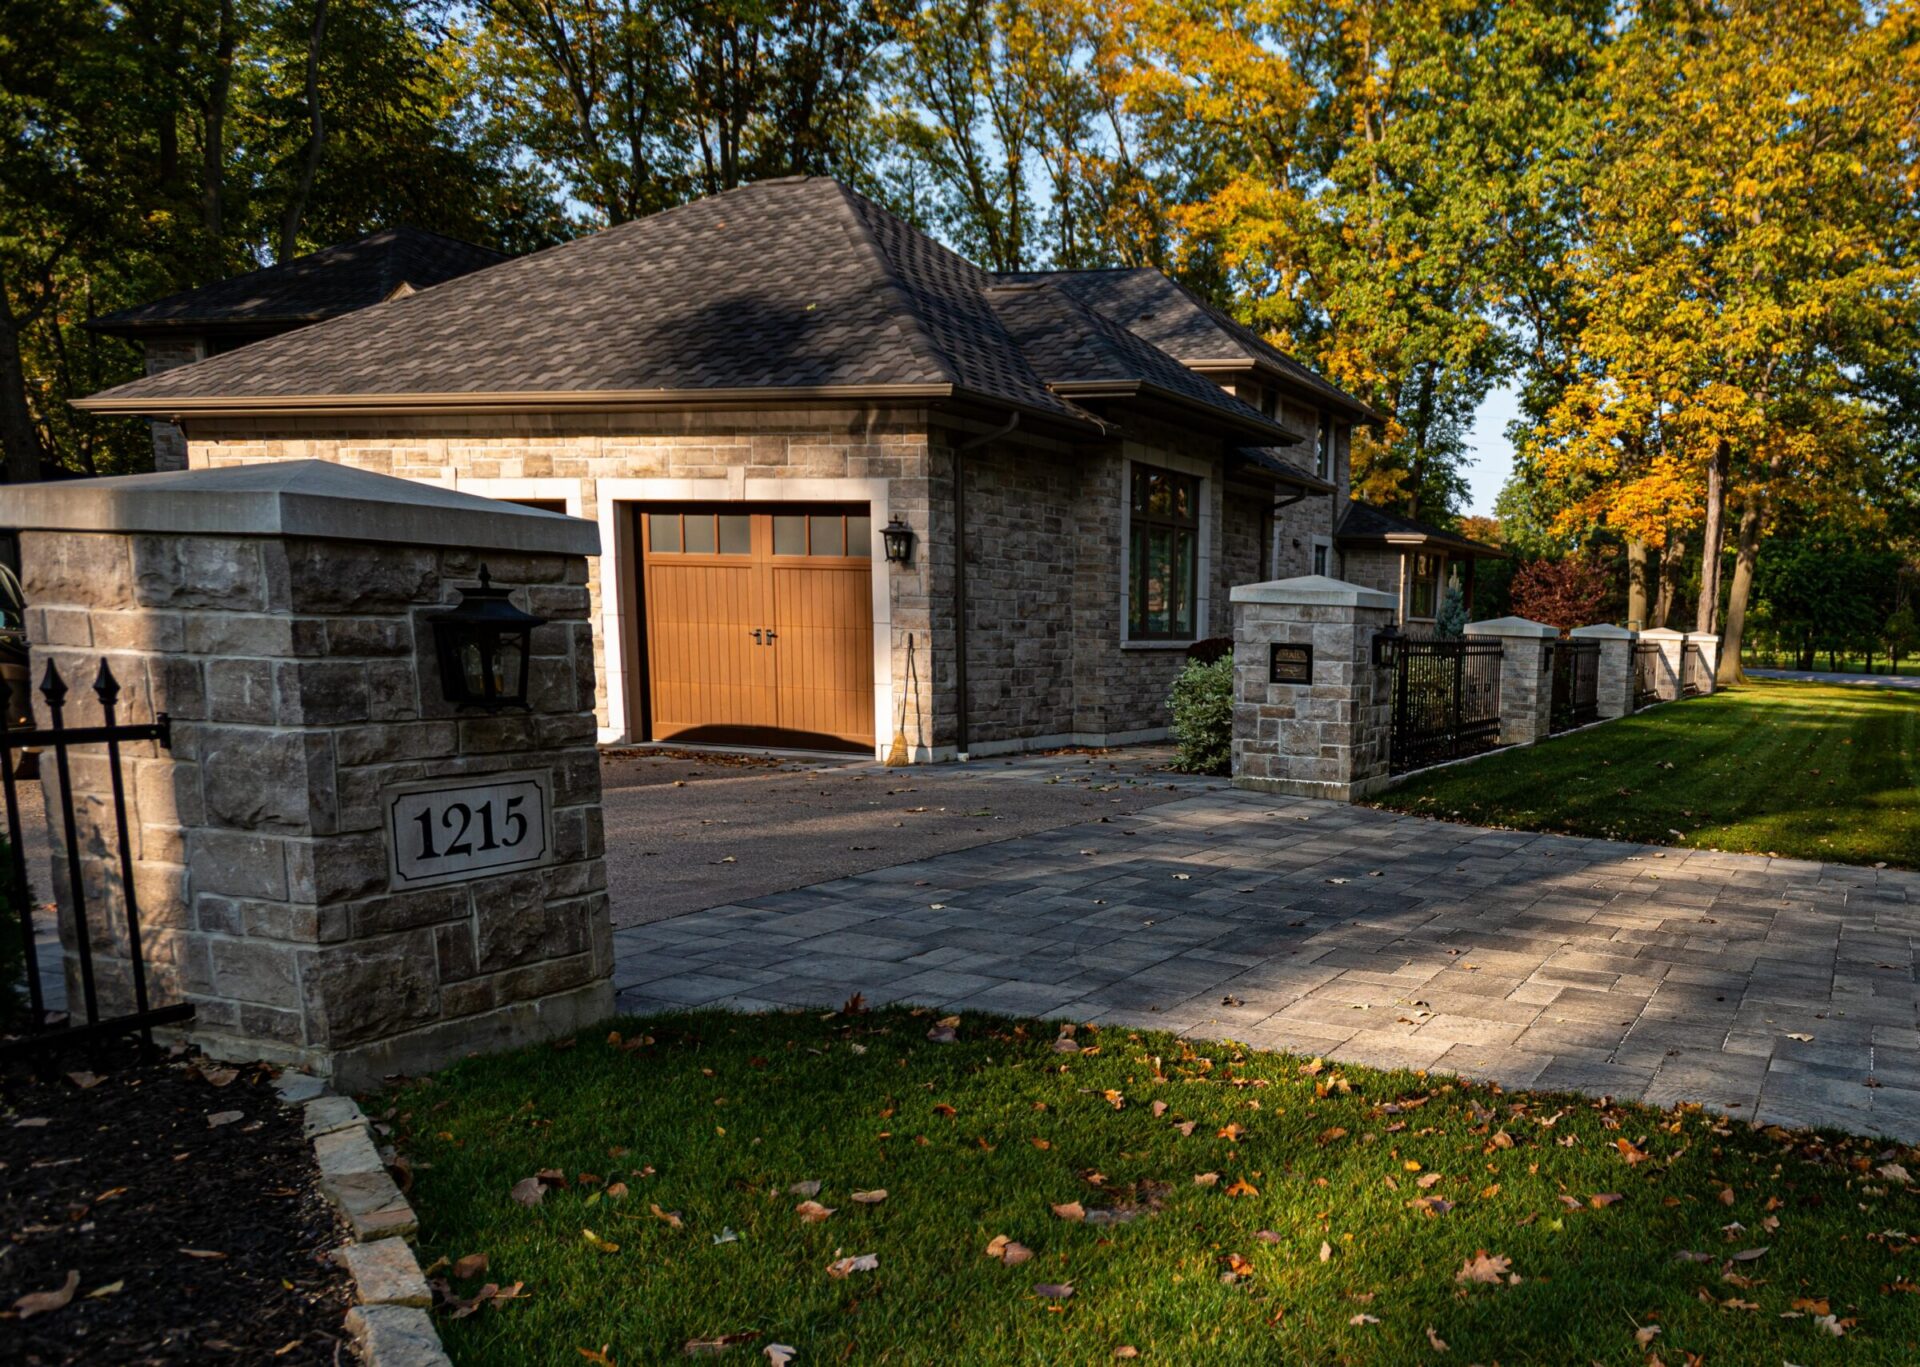 A stone house with a wooden garage door surrounded by a stone fence, lantern, and a well-manicured lawn under autumn trees with golden leaves.